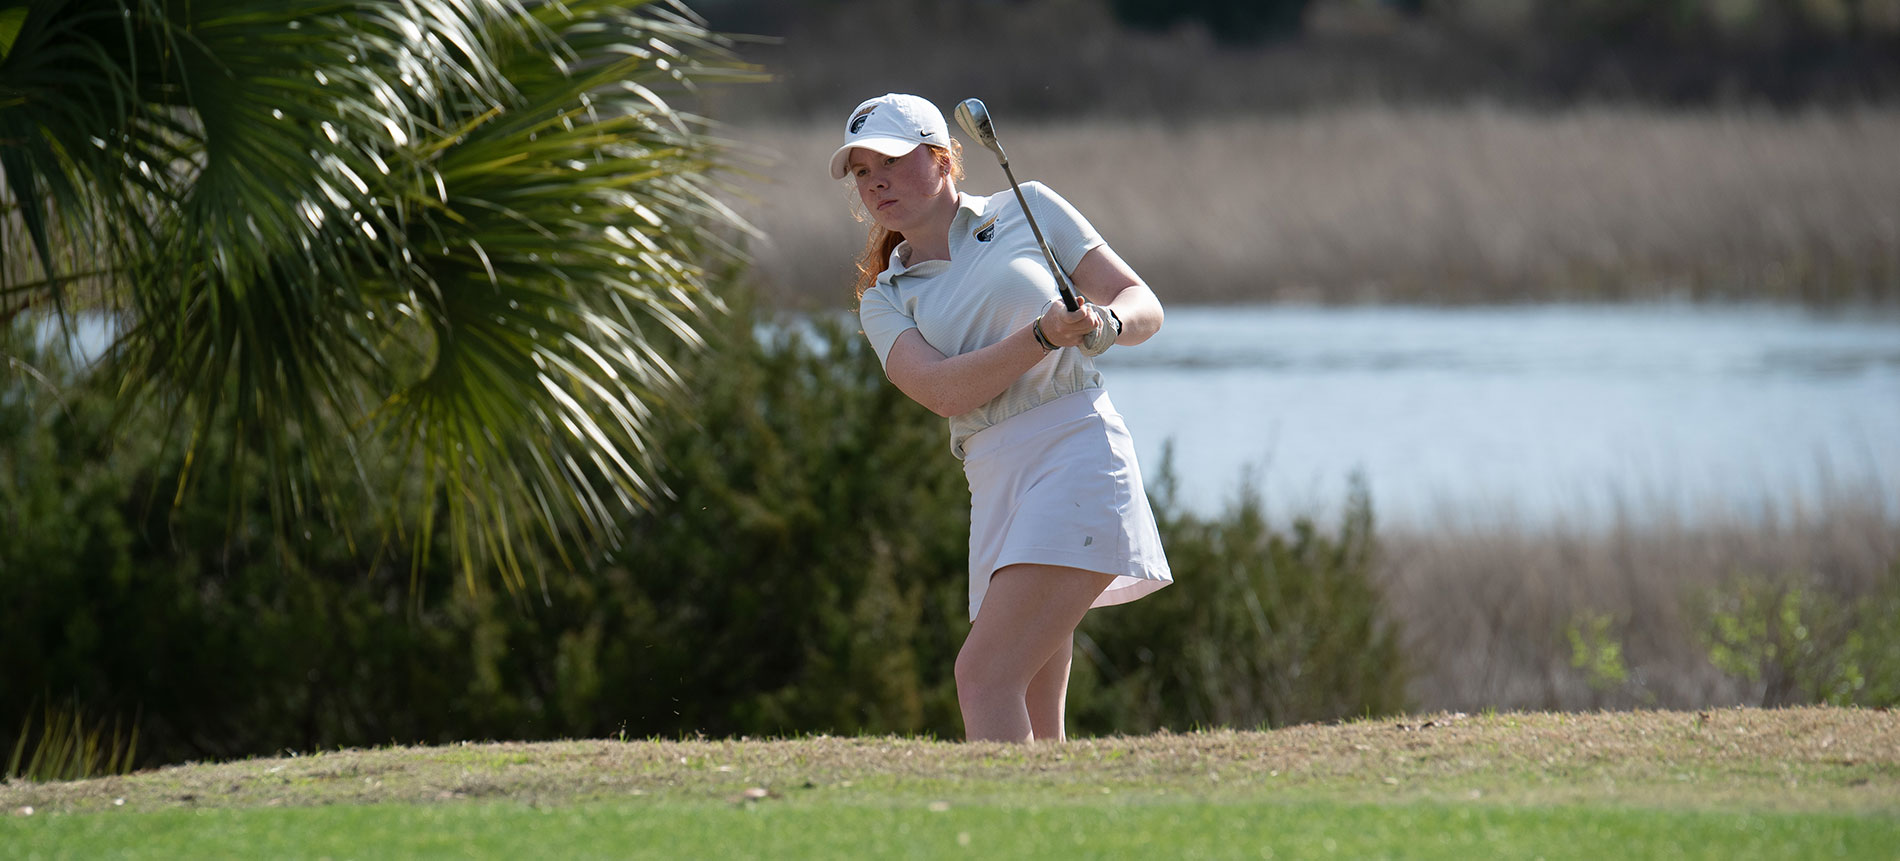 Women’s Golf Finishes Seventh at 45th Annual Peggy Kirk Bell Memorial Invitational